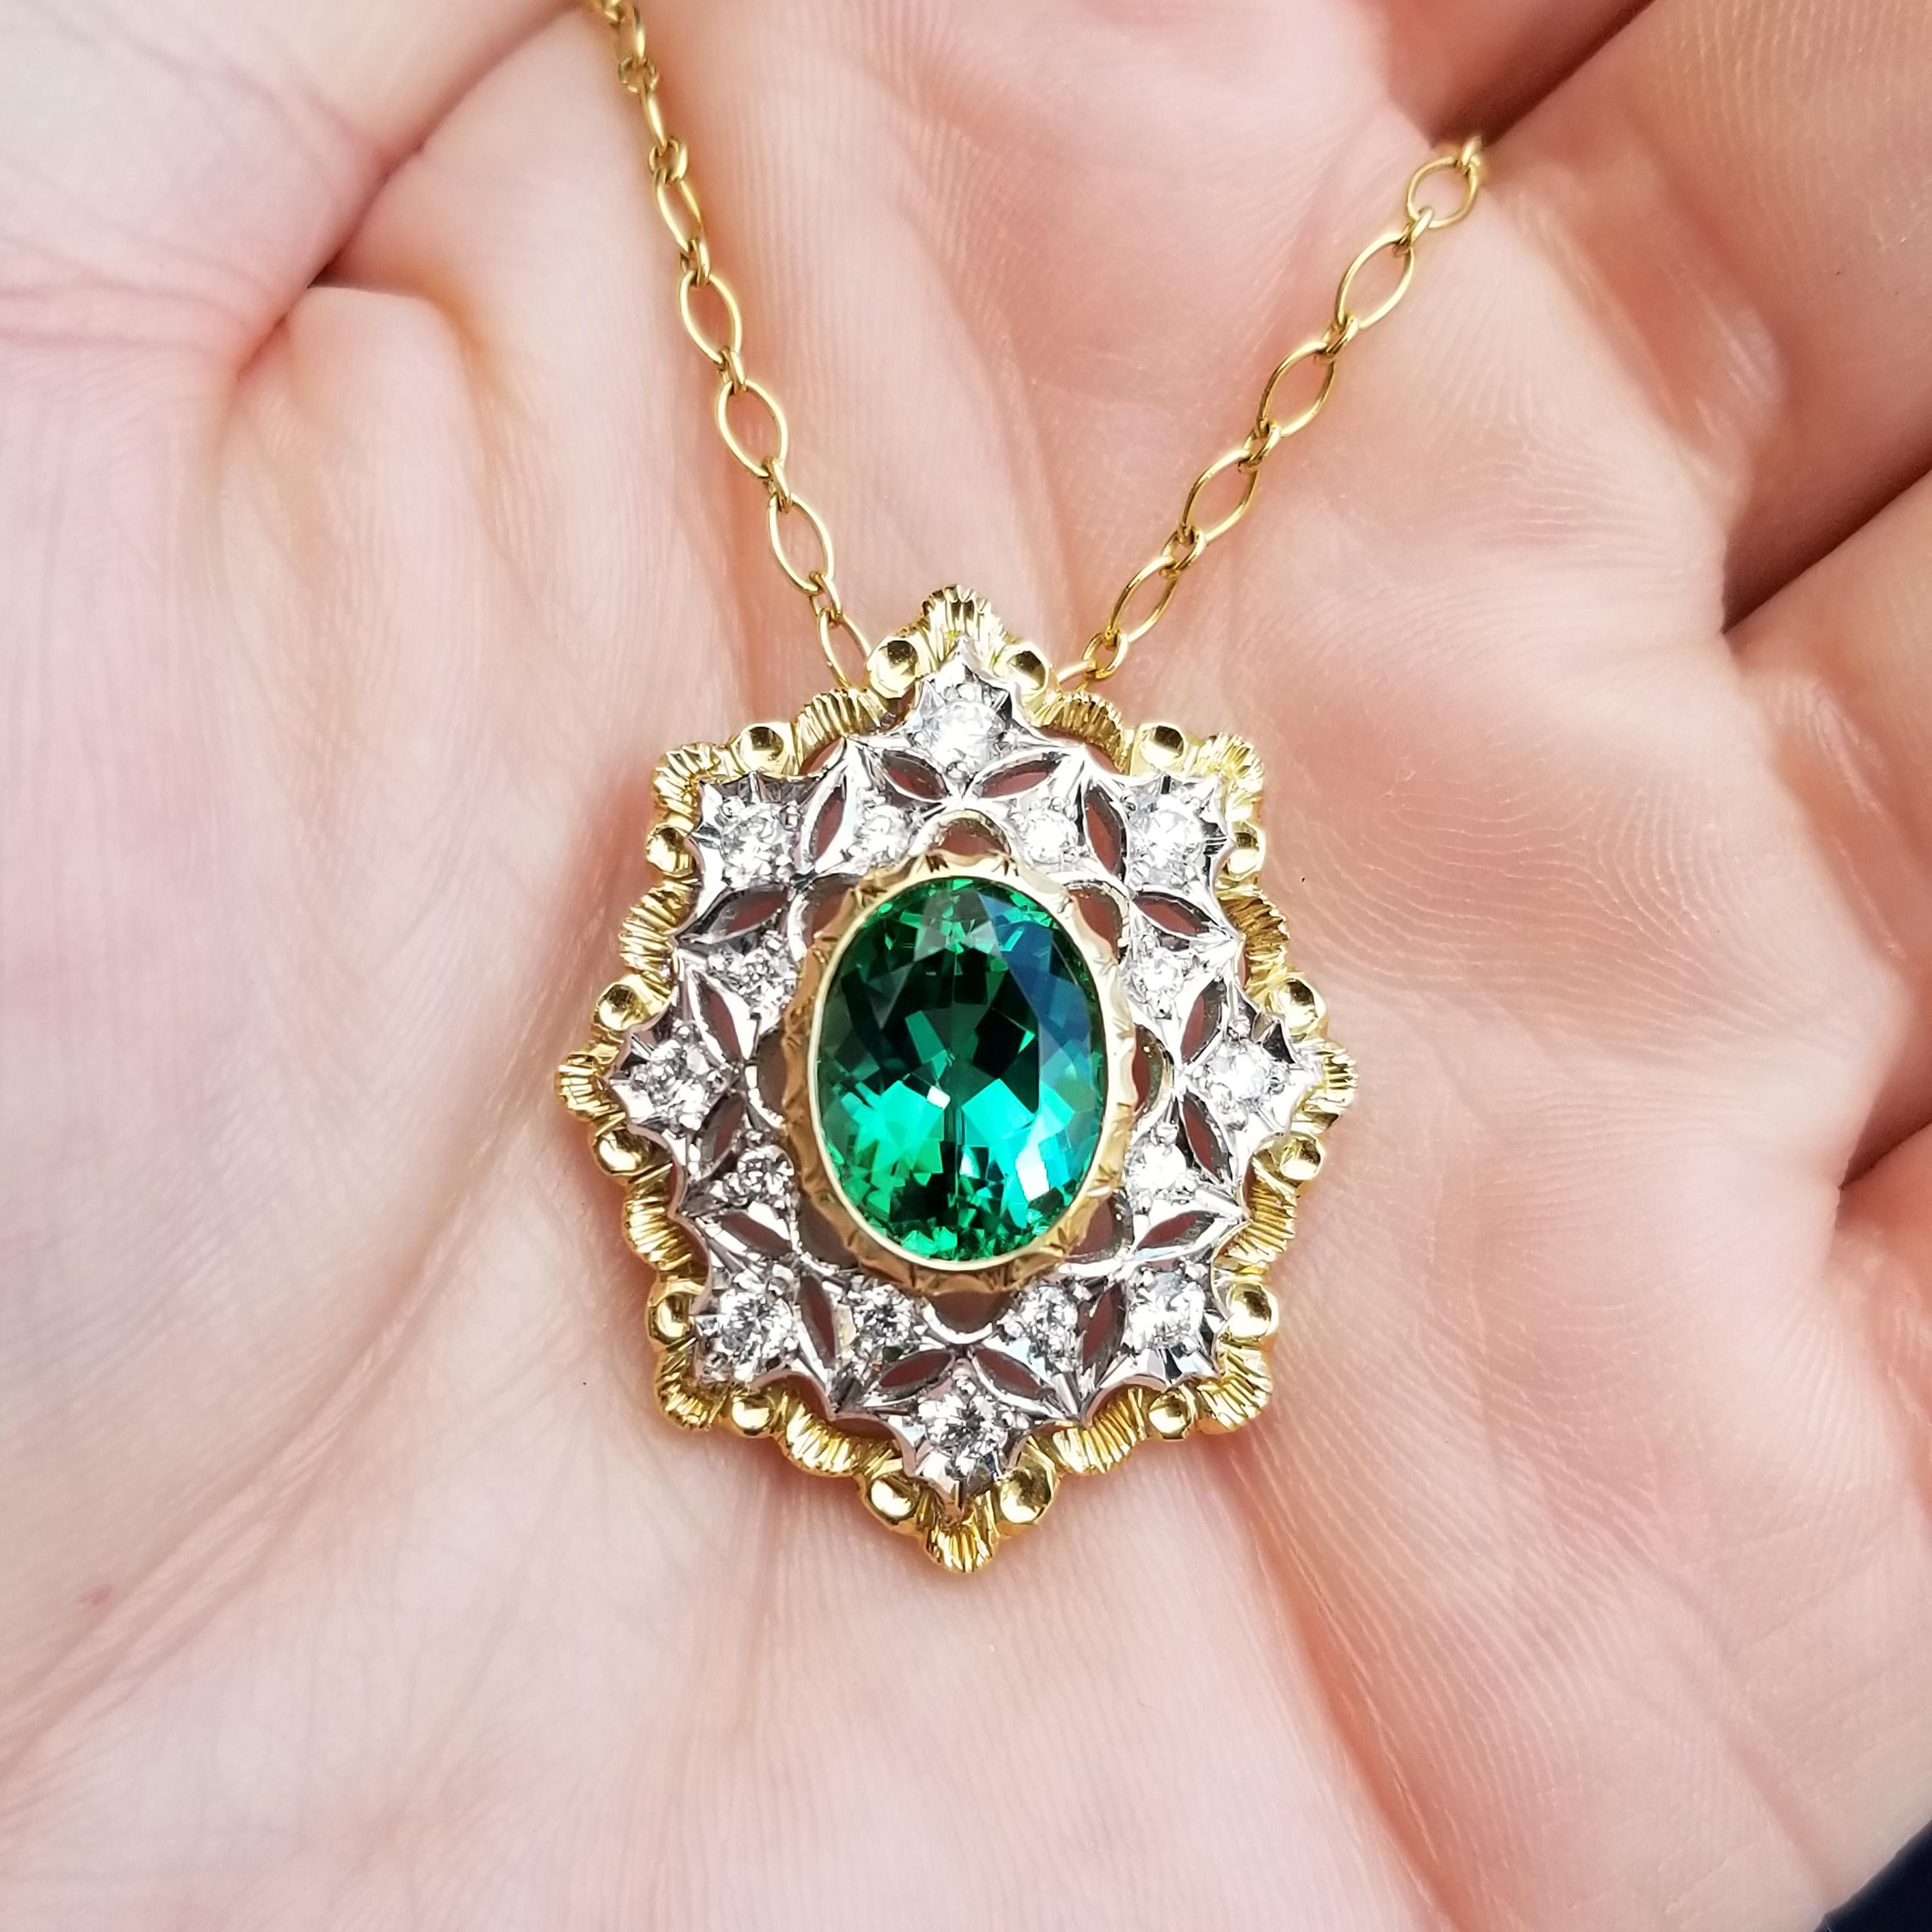 4.30ct Green Tourmaline and 18kt Gold Necklace, Made in Italy by Cynthia Scott In New Condition For Sale In Logan, UT